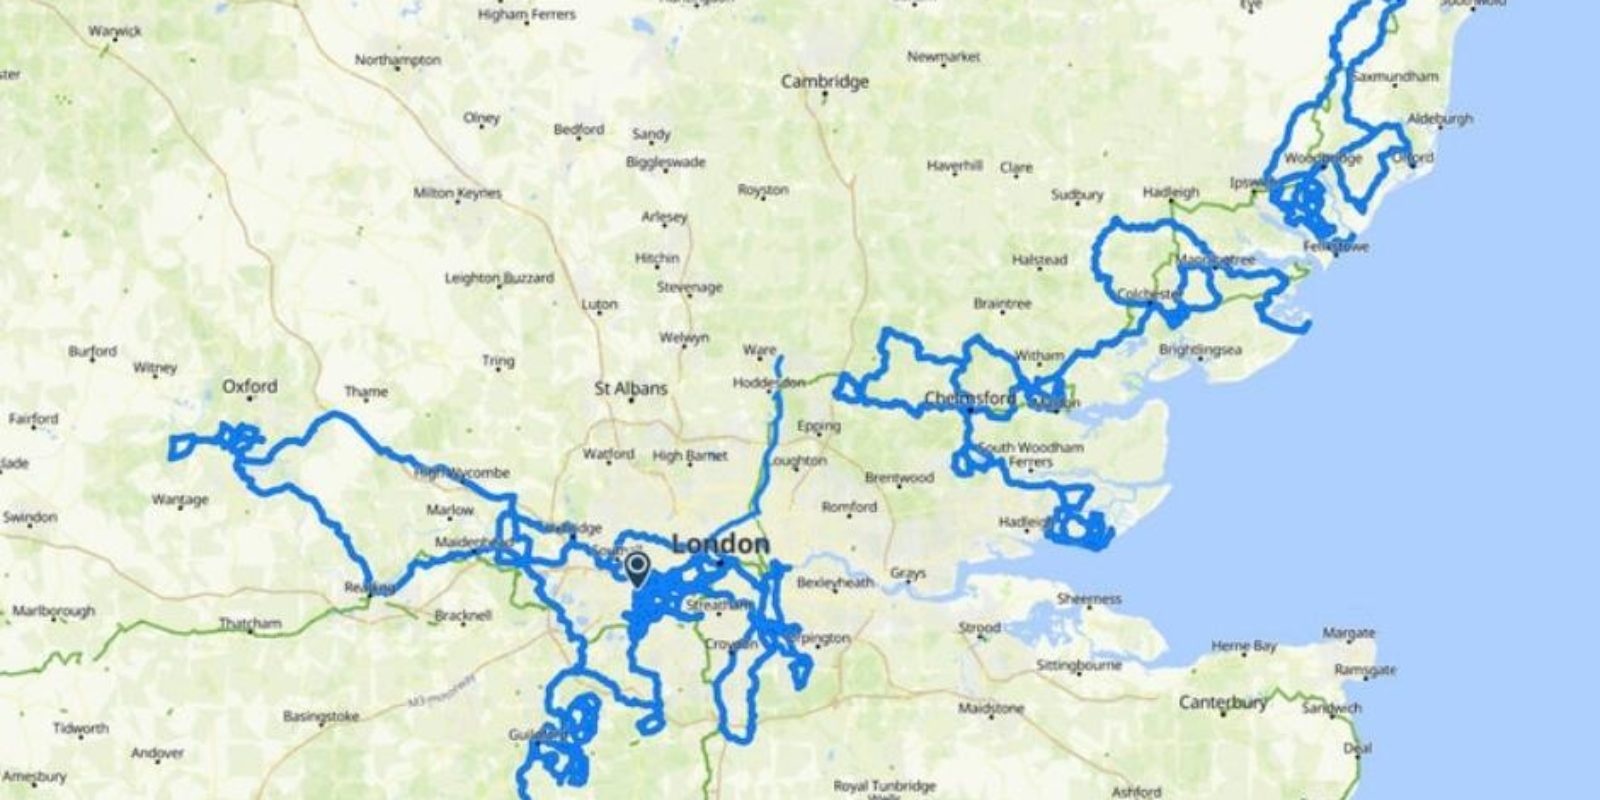 Map of England showing all the combined routes cycled by fundraisers